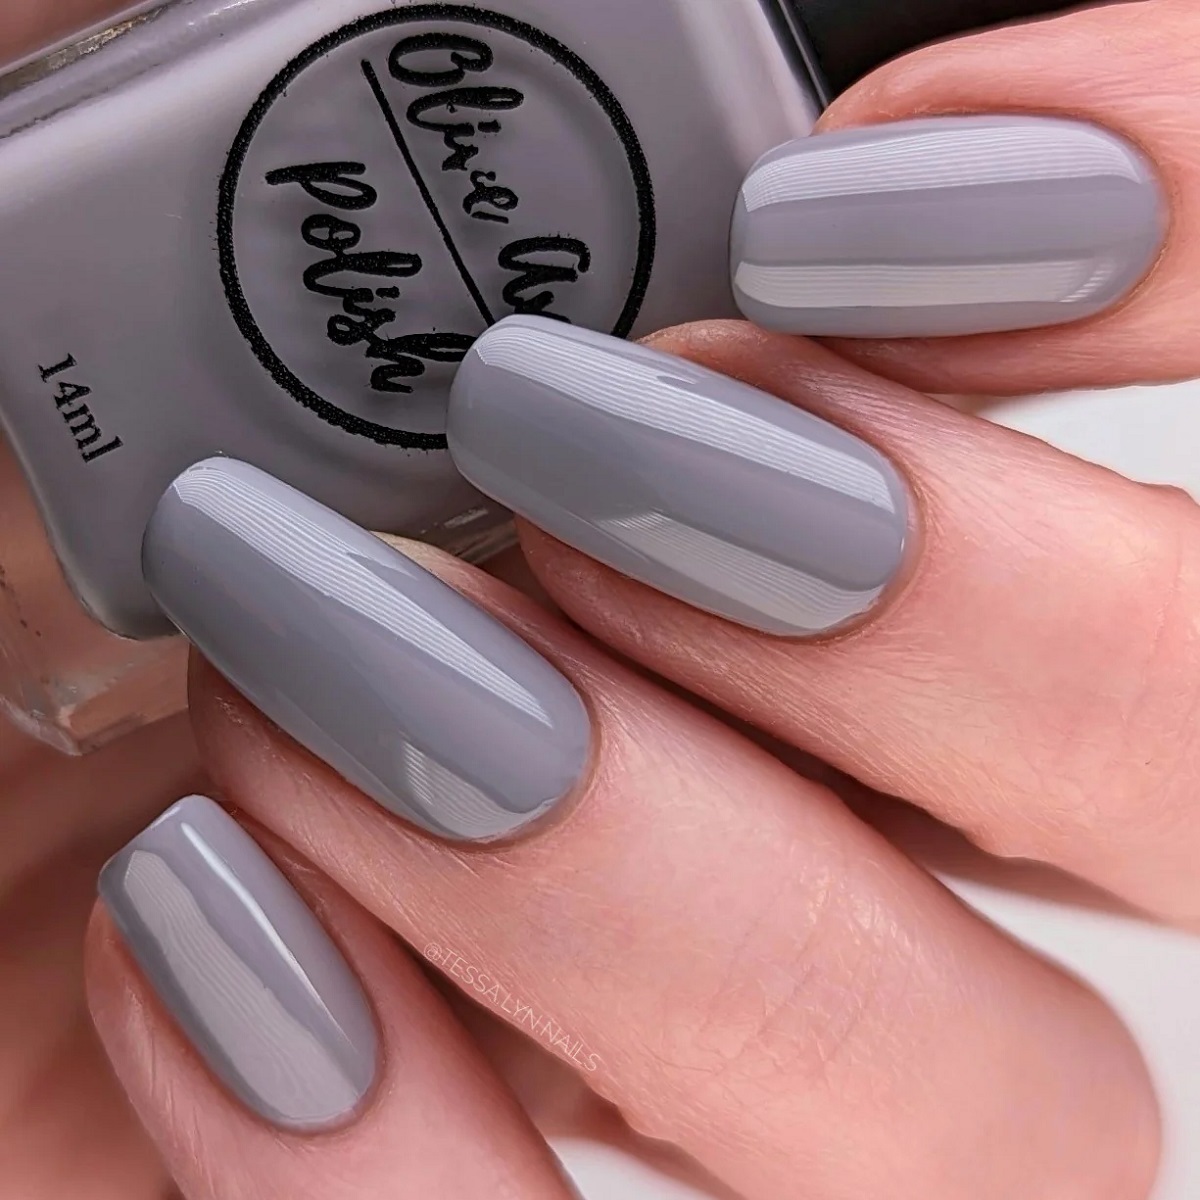 Nails are a pale grey color